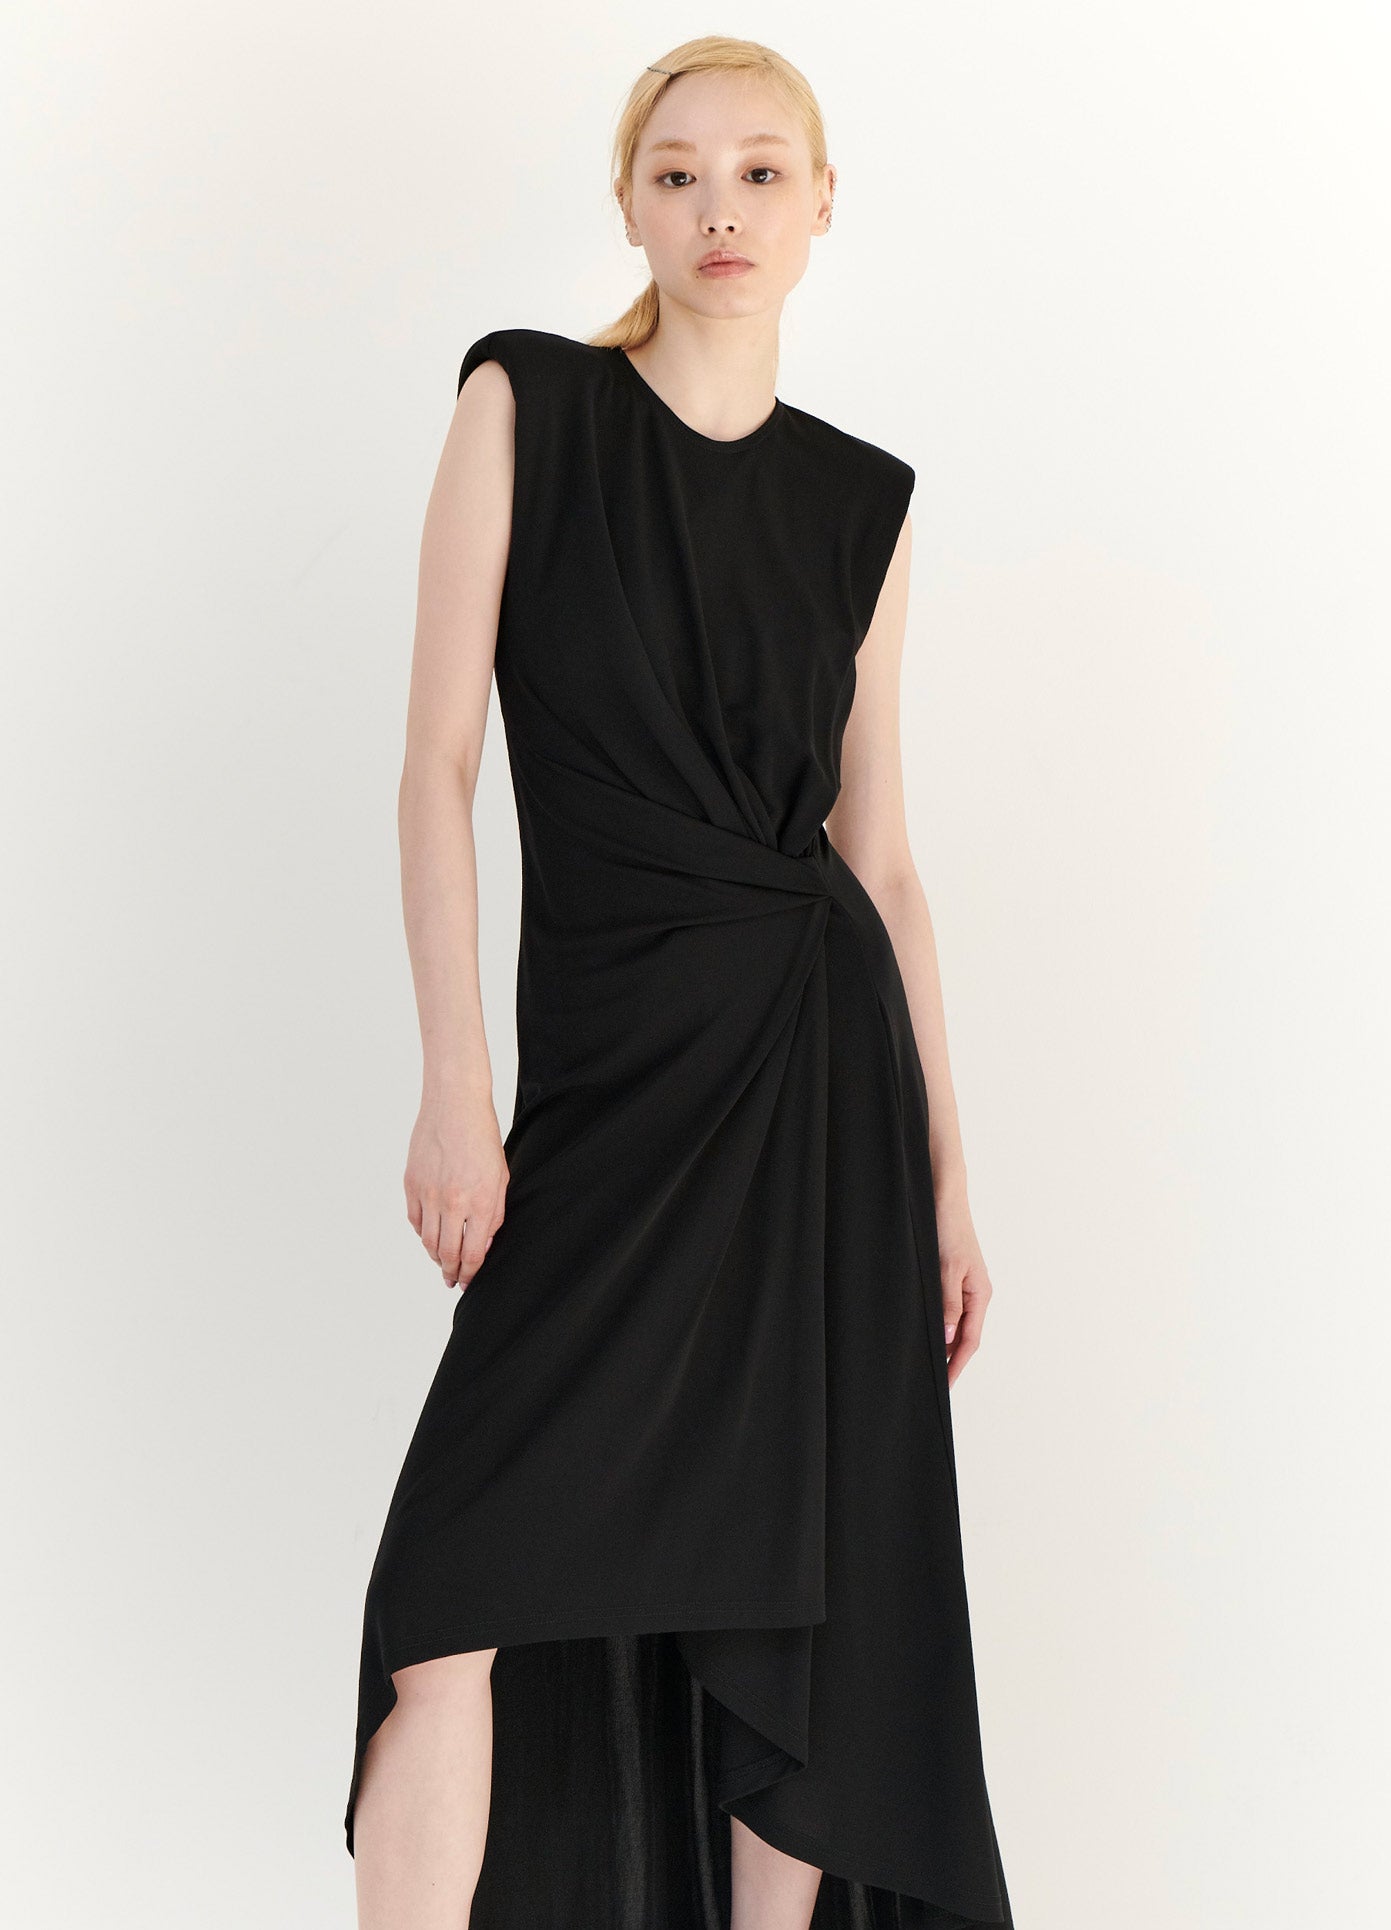 MONSE Gathered Power Shoulder Dress in Black on Model Front View